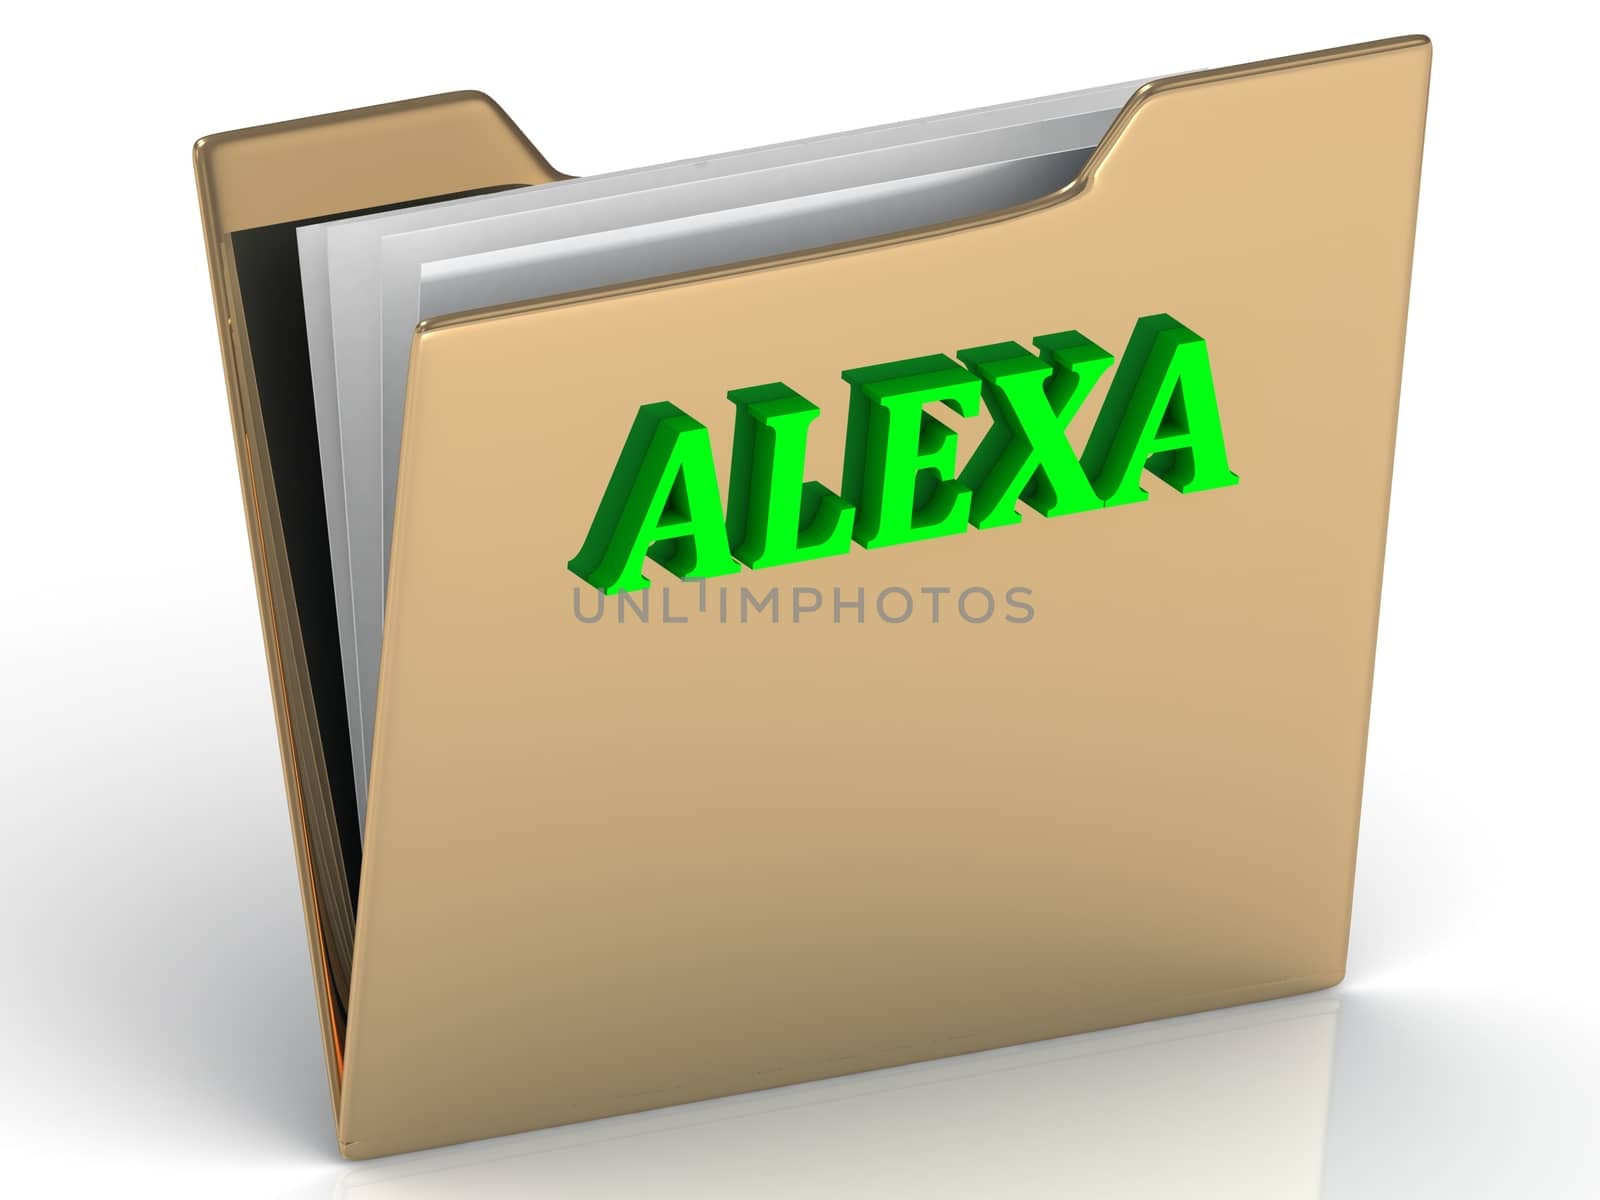 ALEXA- bright green letters on gold paperwork folder by GreenMost